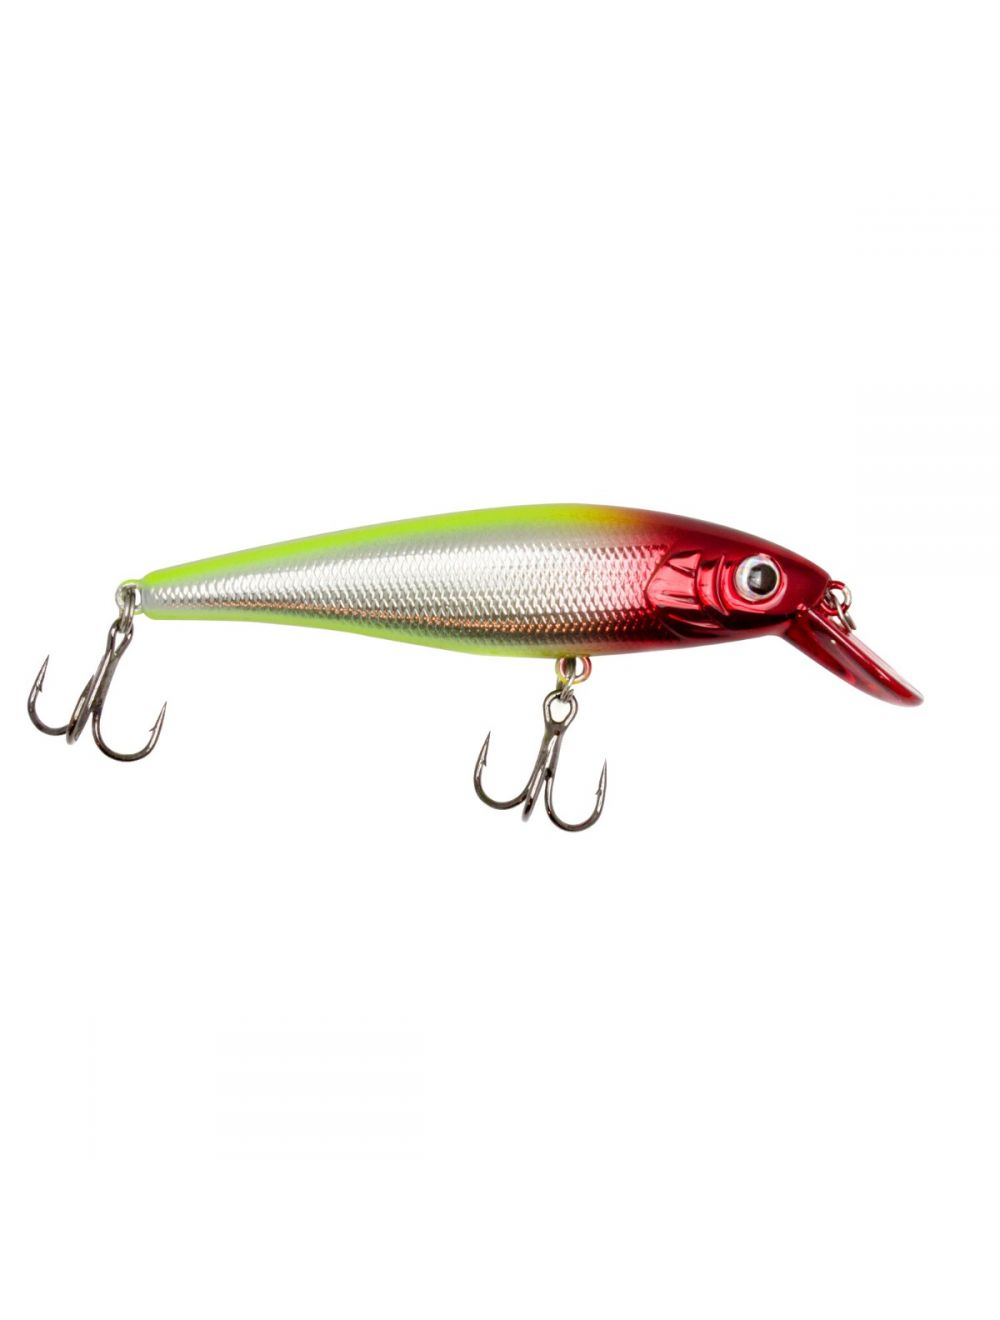 Leland Lures Trout Magnet Glow in Dark Fishing Equipment, Soft Plastic Lures  -  Canada